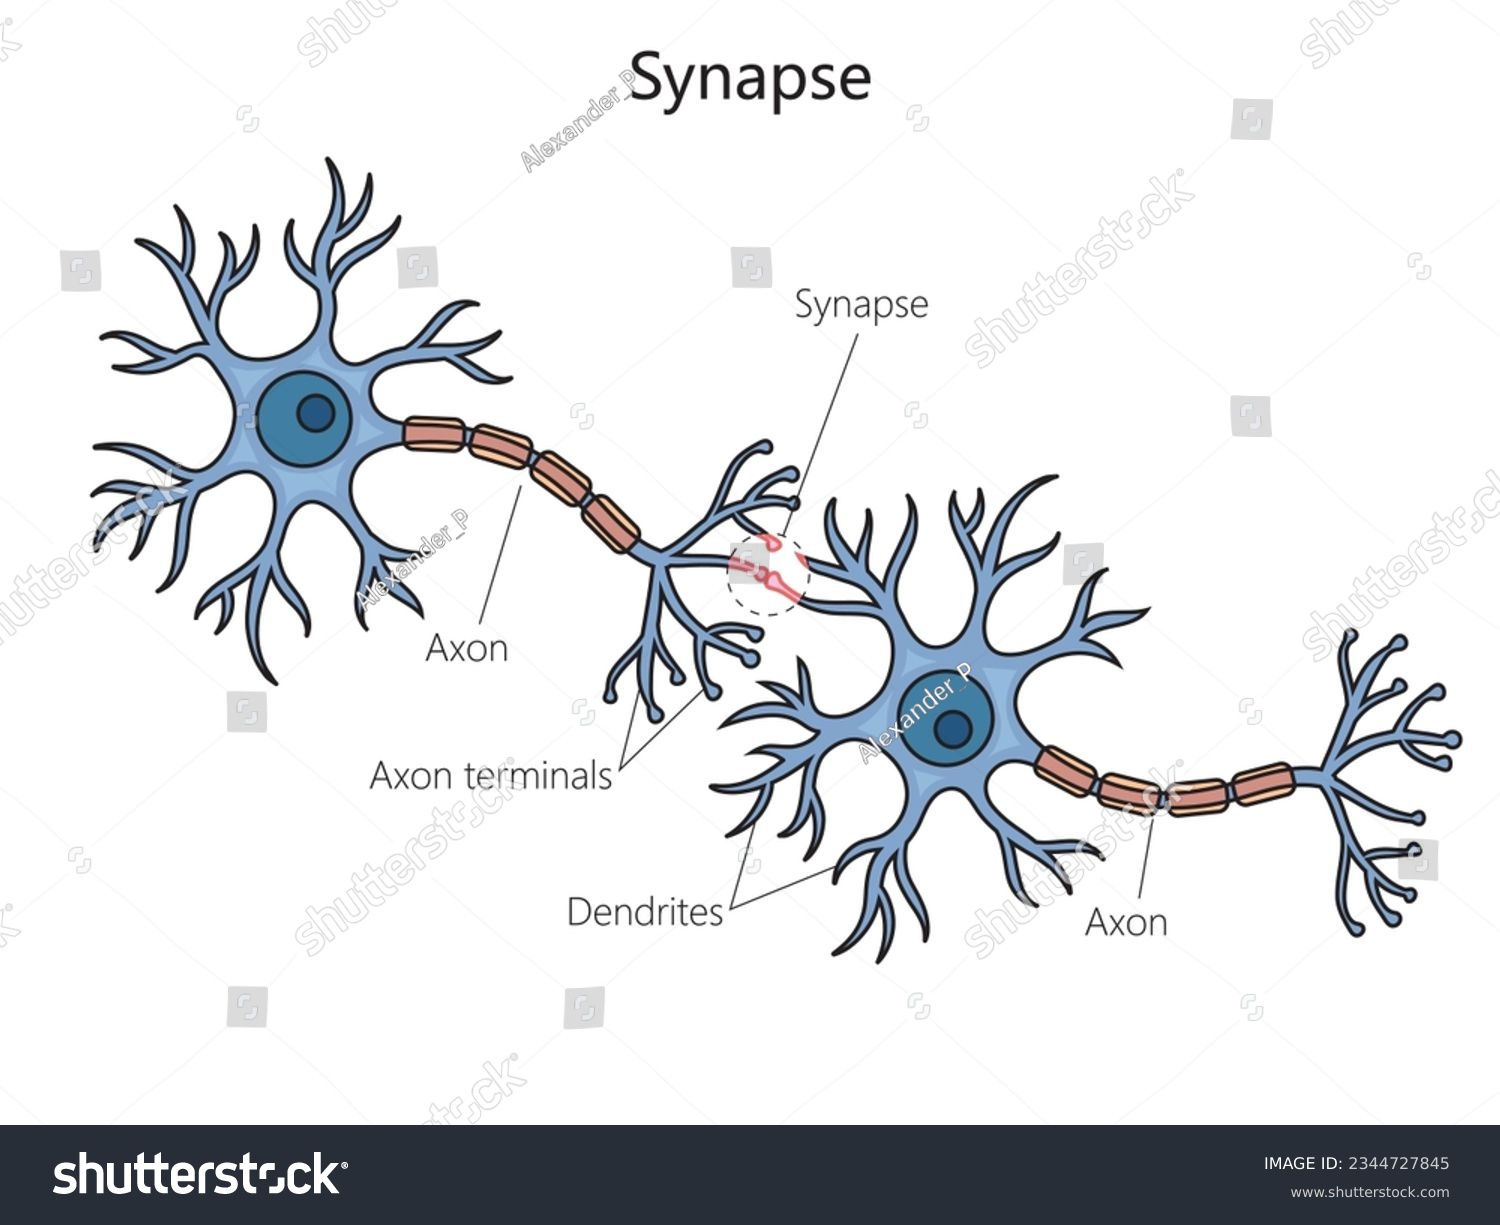 Synapse connection diagram schematic vector illustration. Medical science educational illustration #2344727845